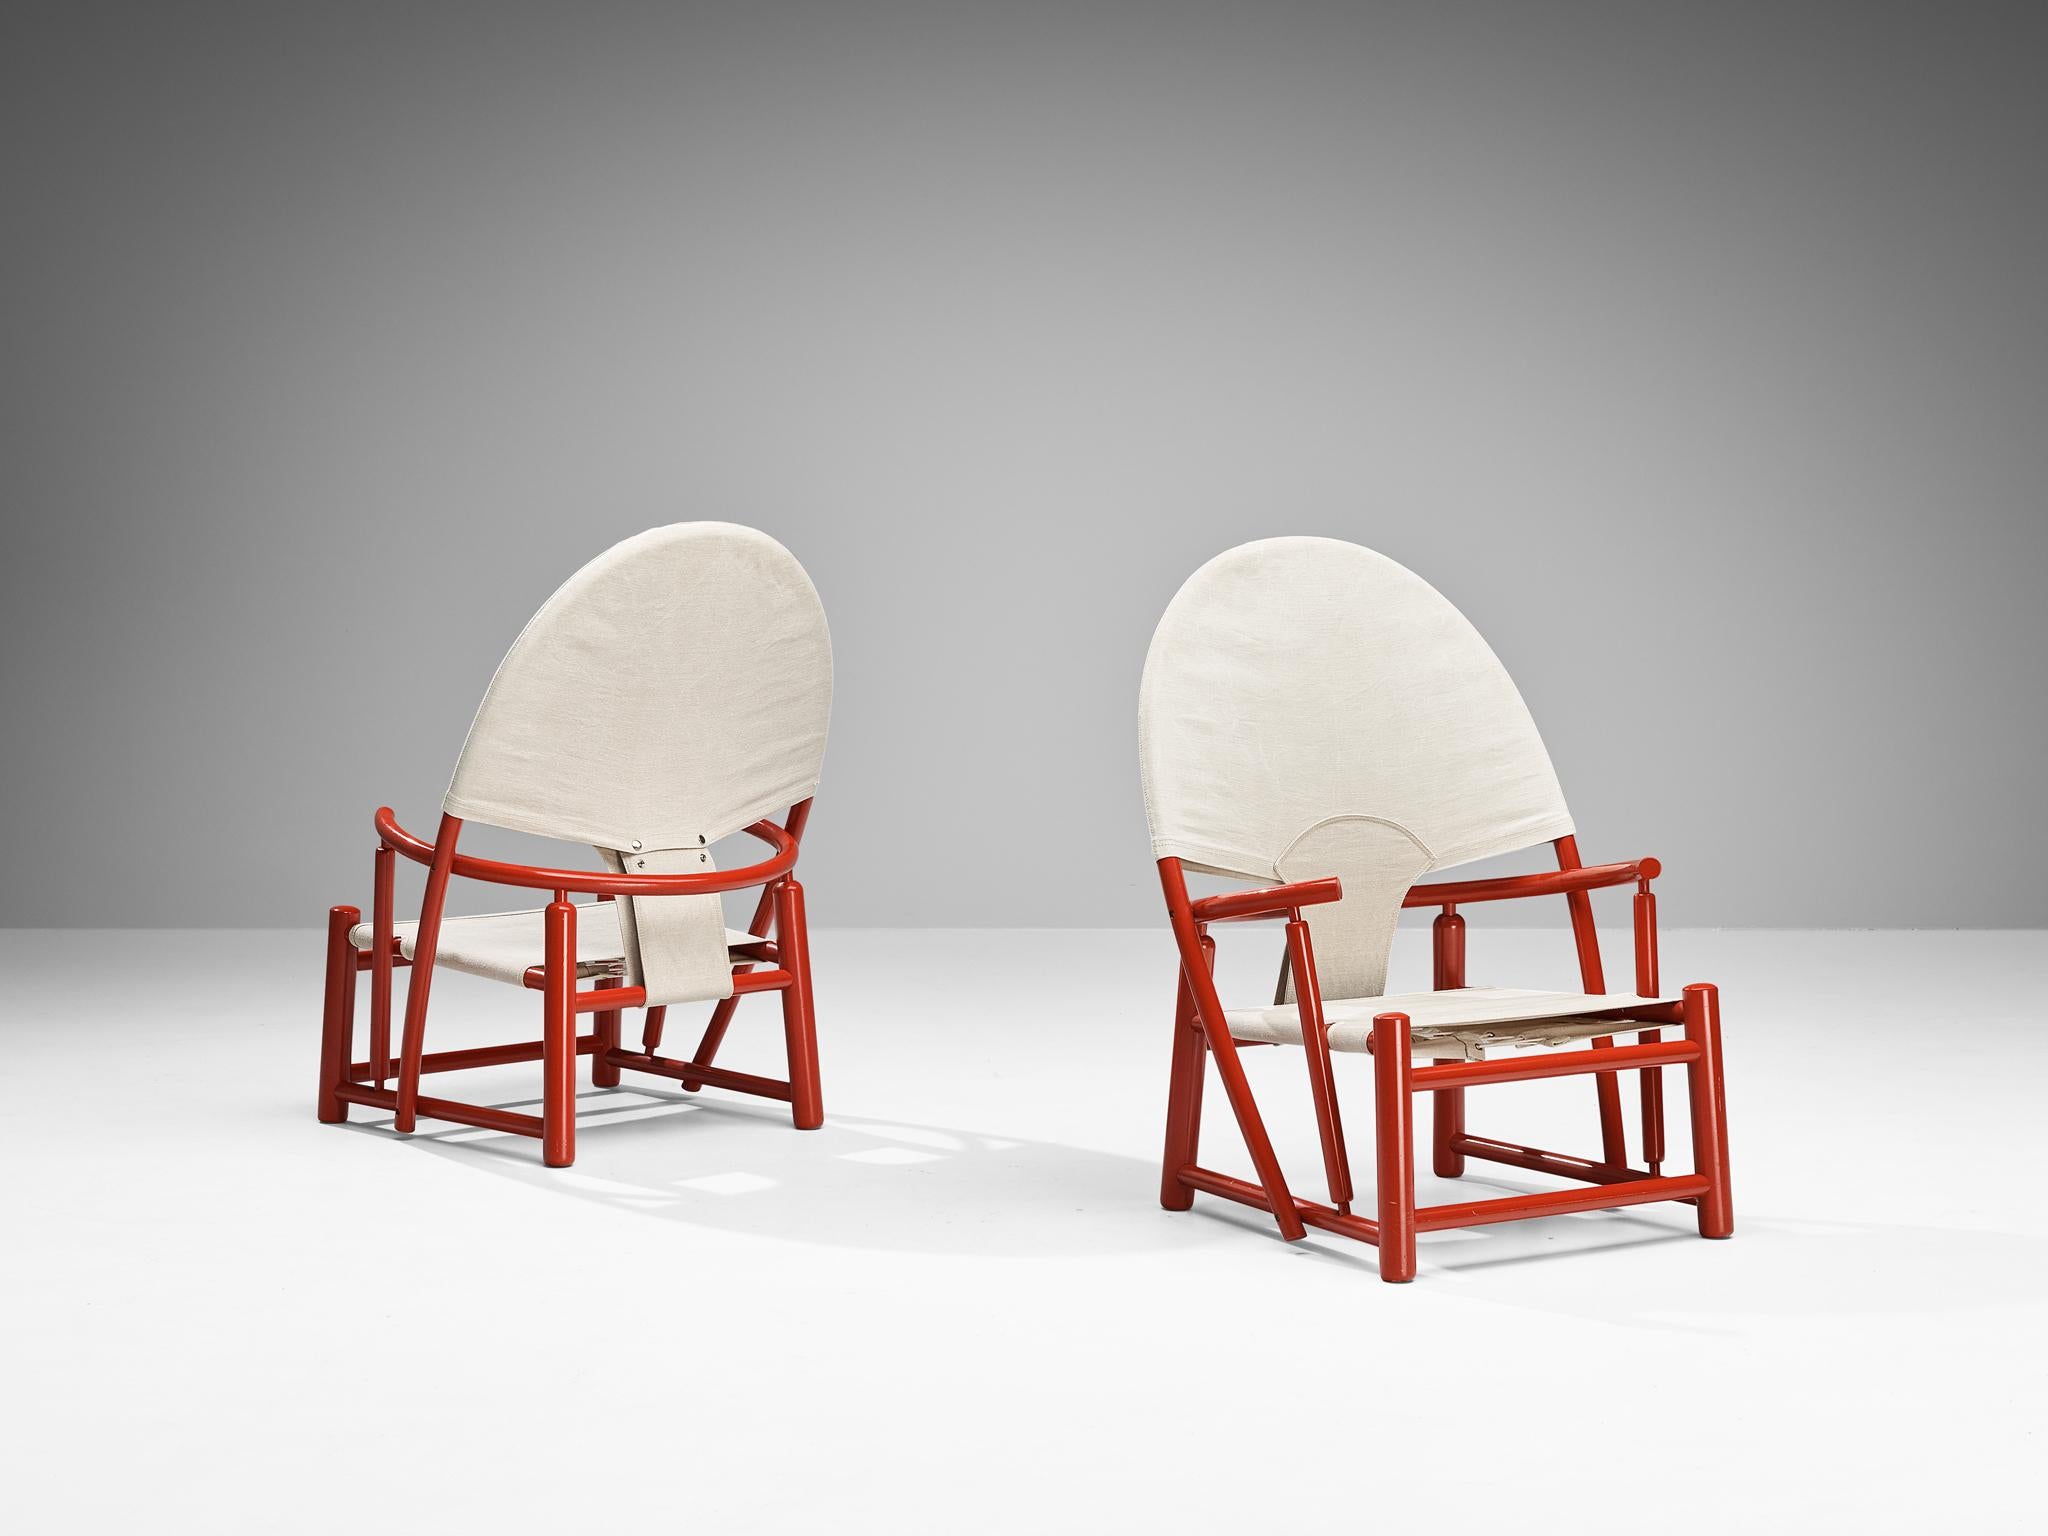 Werther Toffoloni & Piero Palange for Germa, pair of 'Hoop' lounge chairs, model 'G23', lacquered wood, canvas, Italy, 1972

Made in 1972, these Hoop armchairs are designed by Italian duo Werther Toffoloni & Piero Palange for Germa. The pronounced